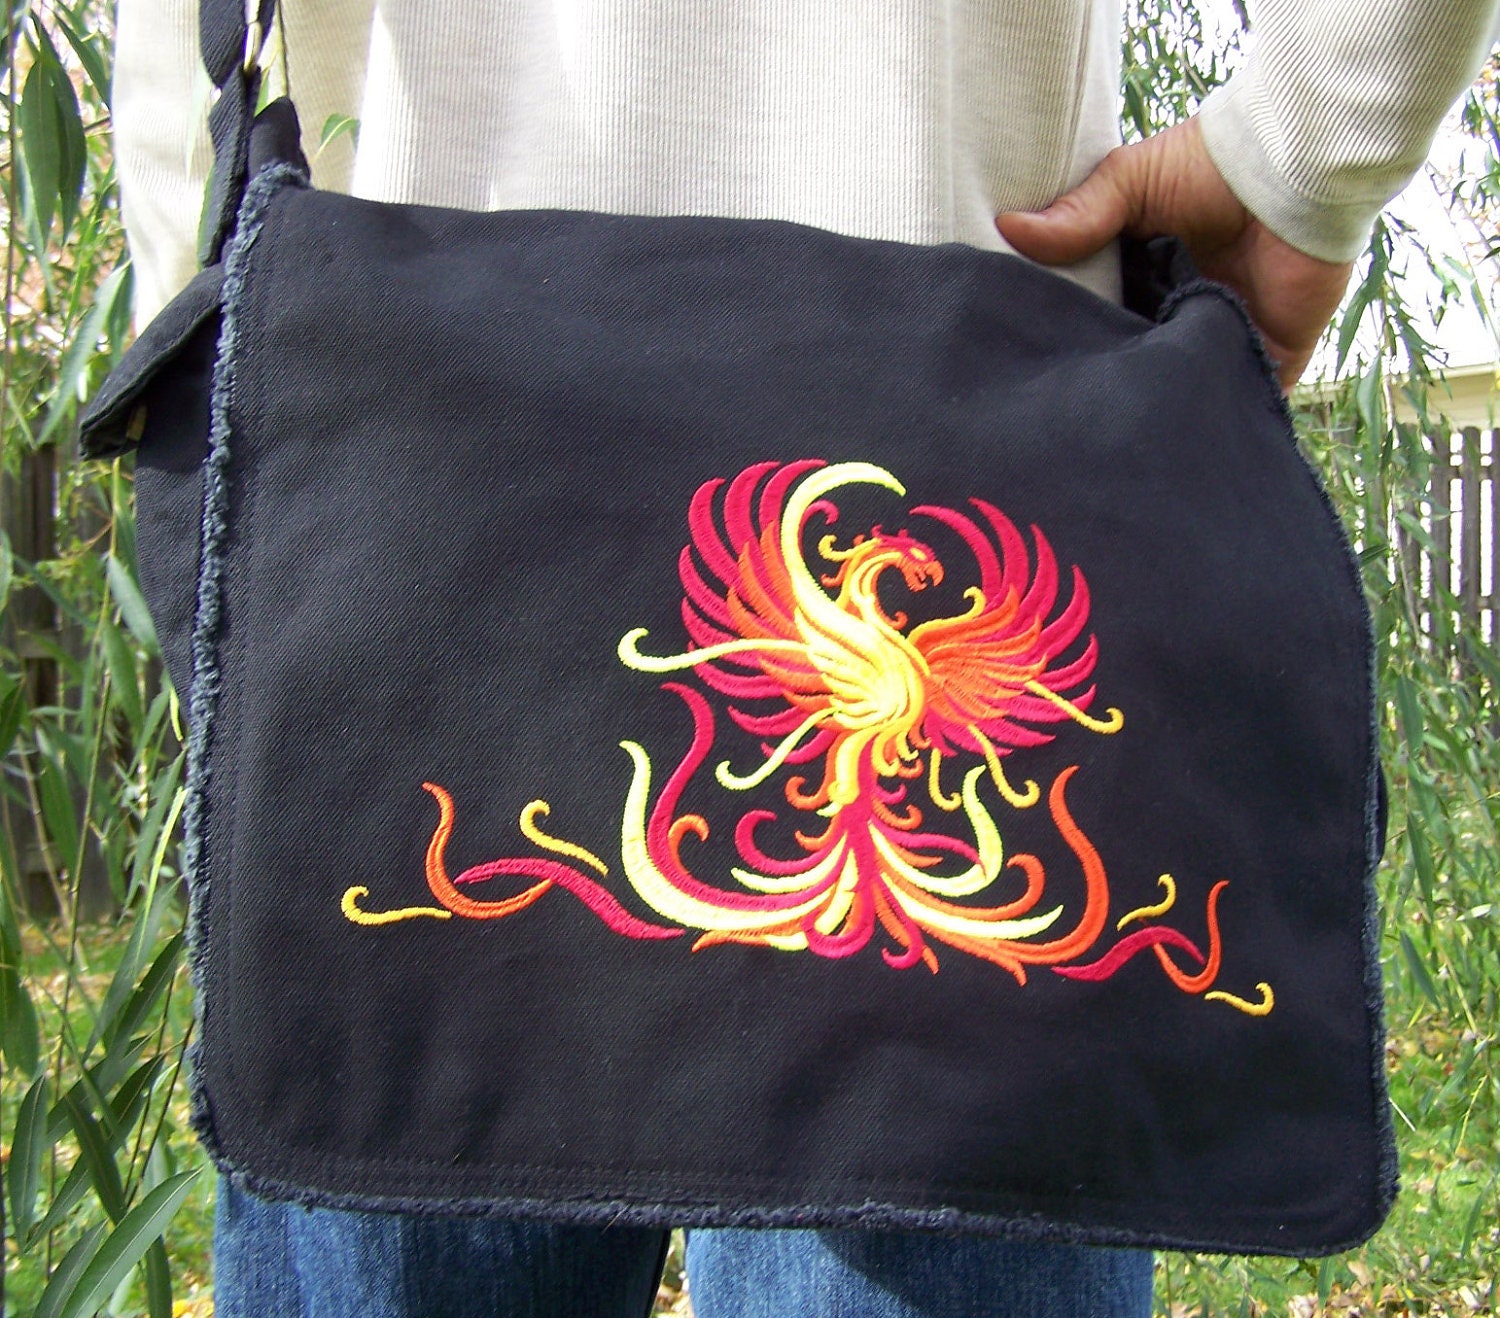 Phoenix embroidered canvas messenger bag by SetcSpecialty on Etsy